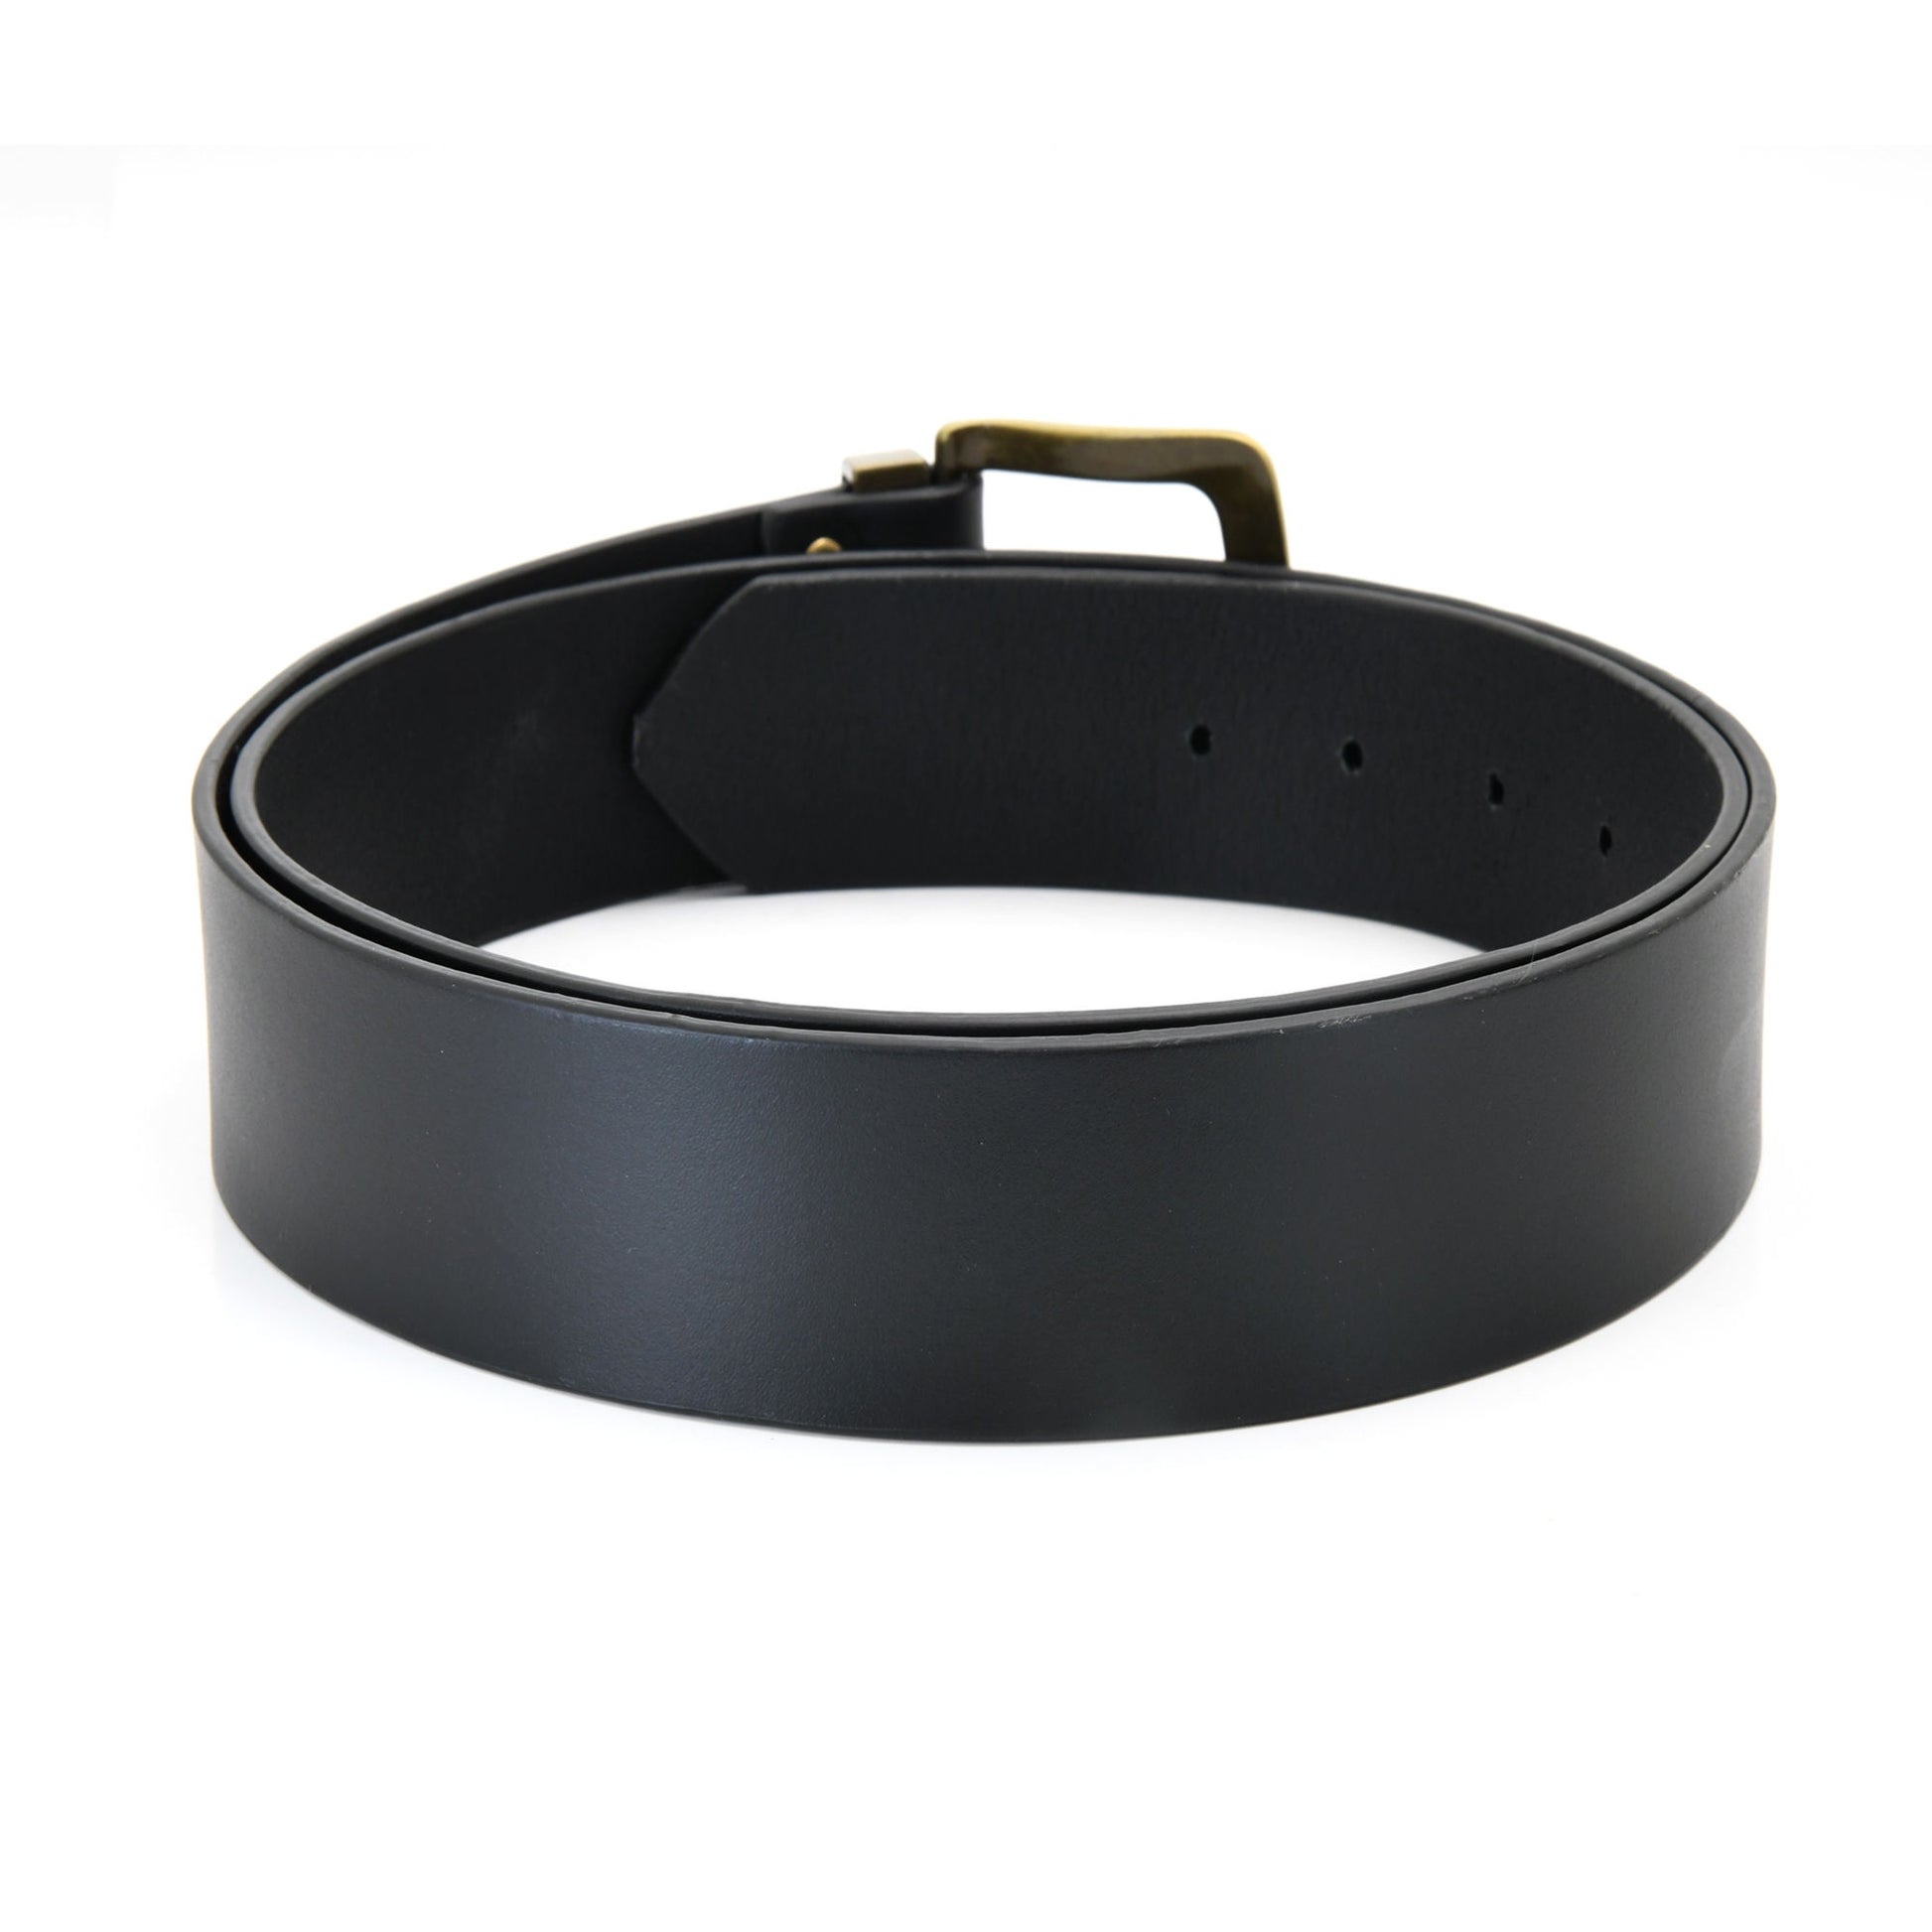 392711 - one and a half inch wide leather belt in black color full grain leather with matte gold finish metal buckle & loop - back view